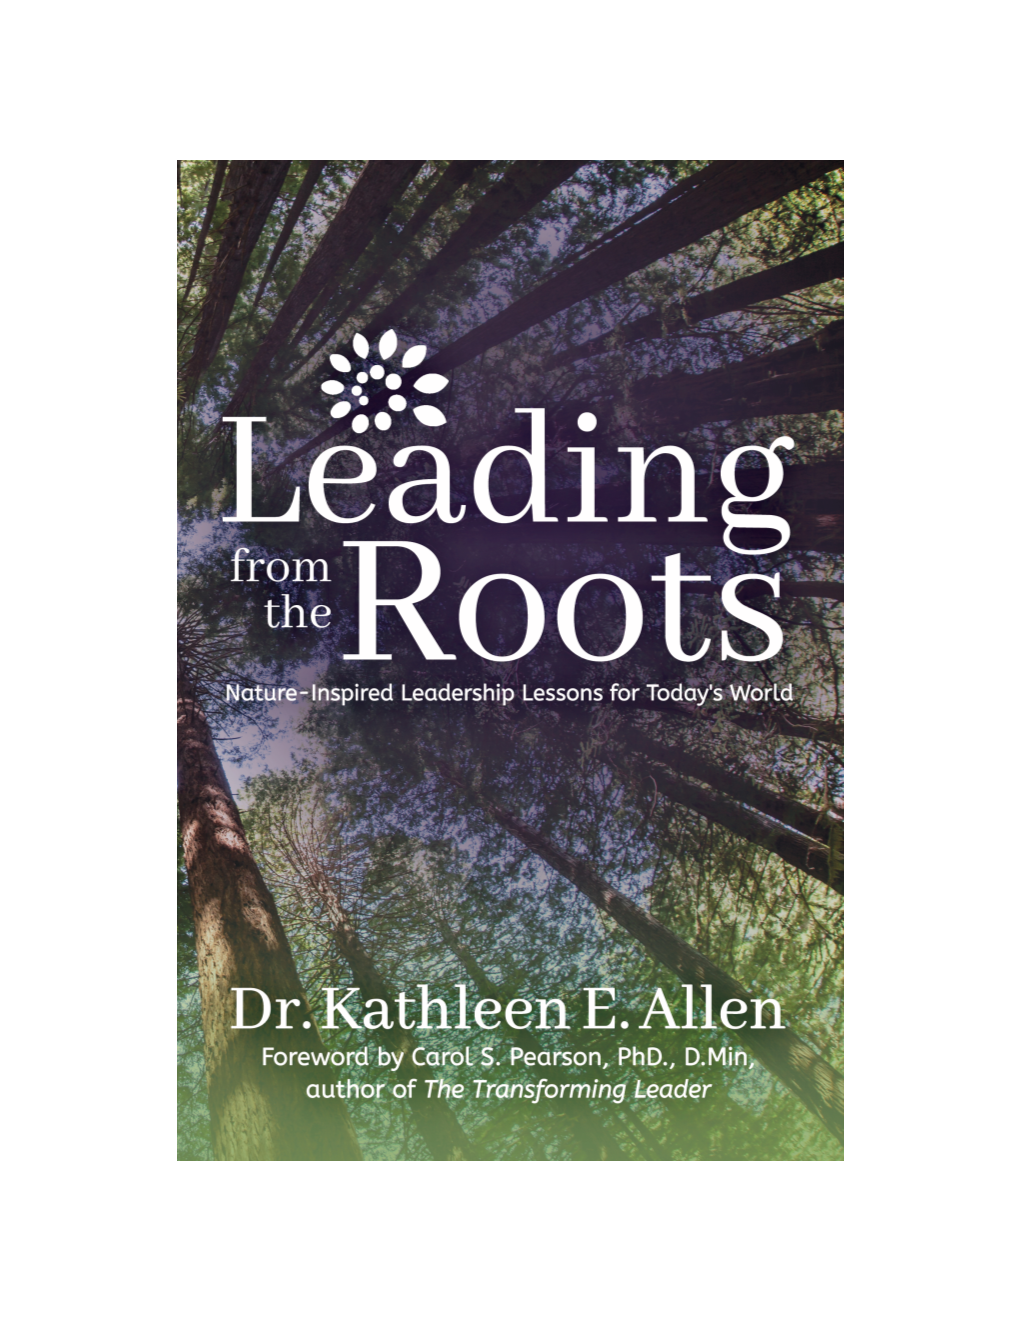 To Download Chapter One of Leading from the Roots